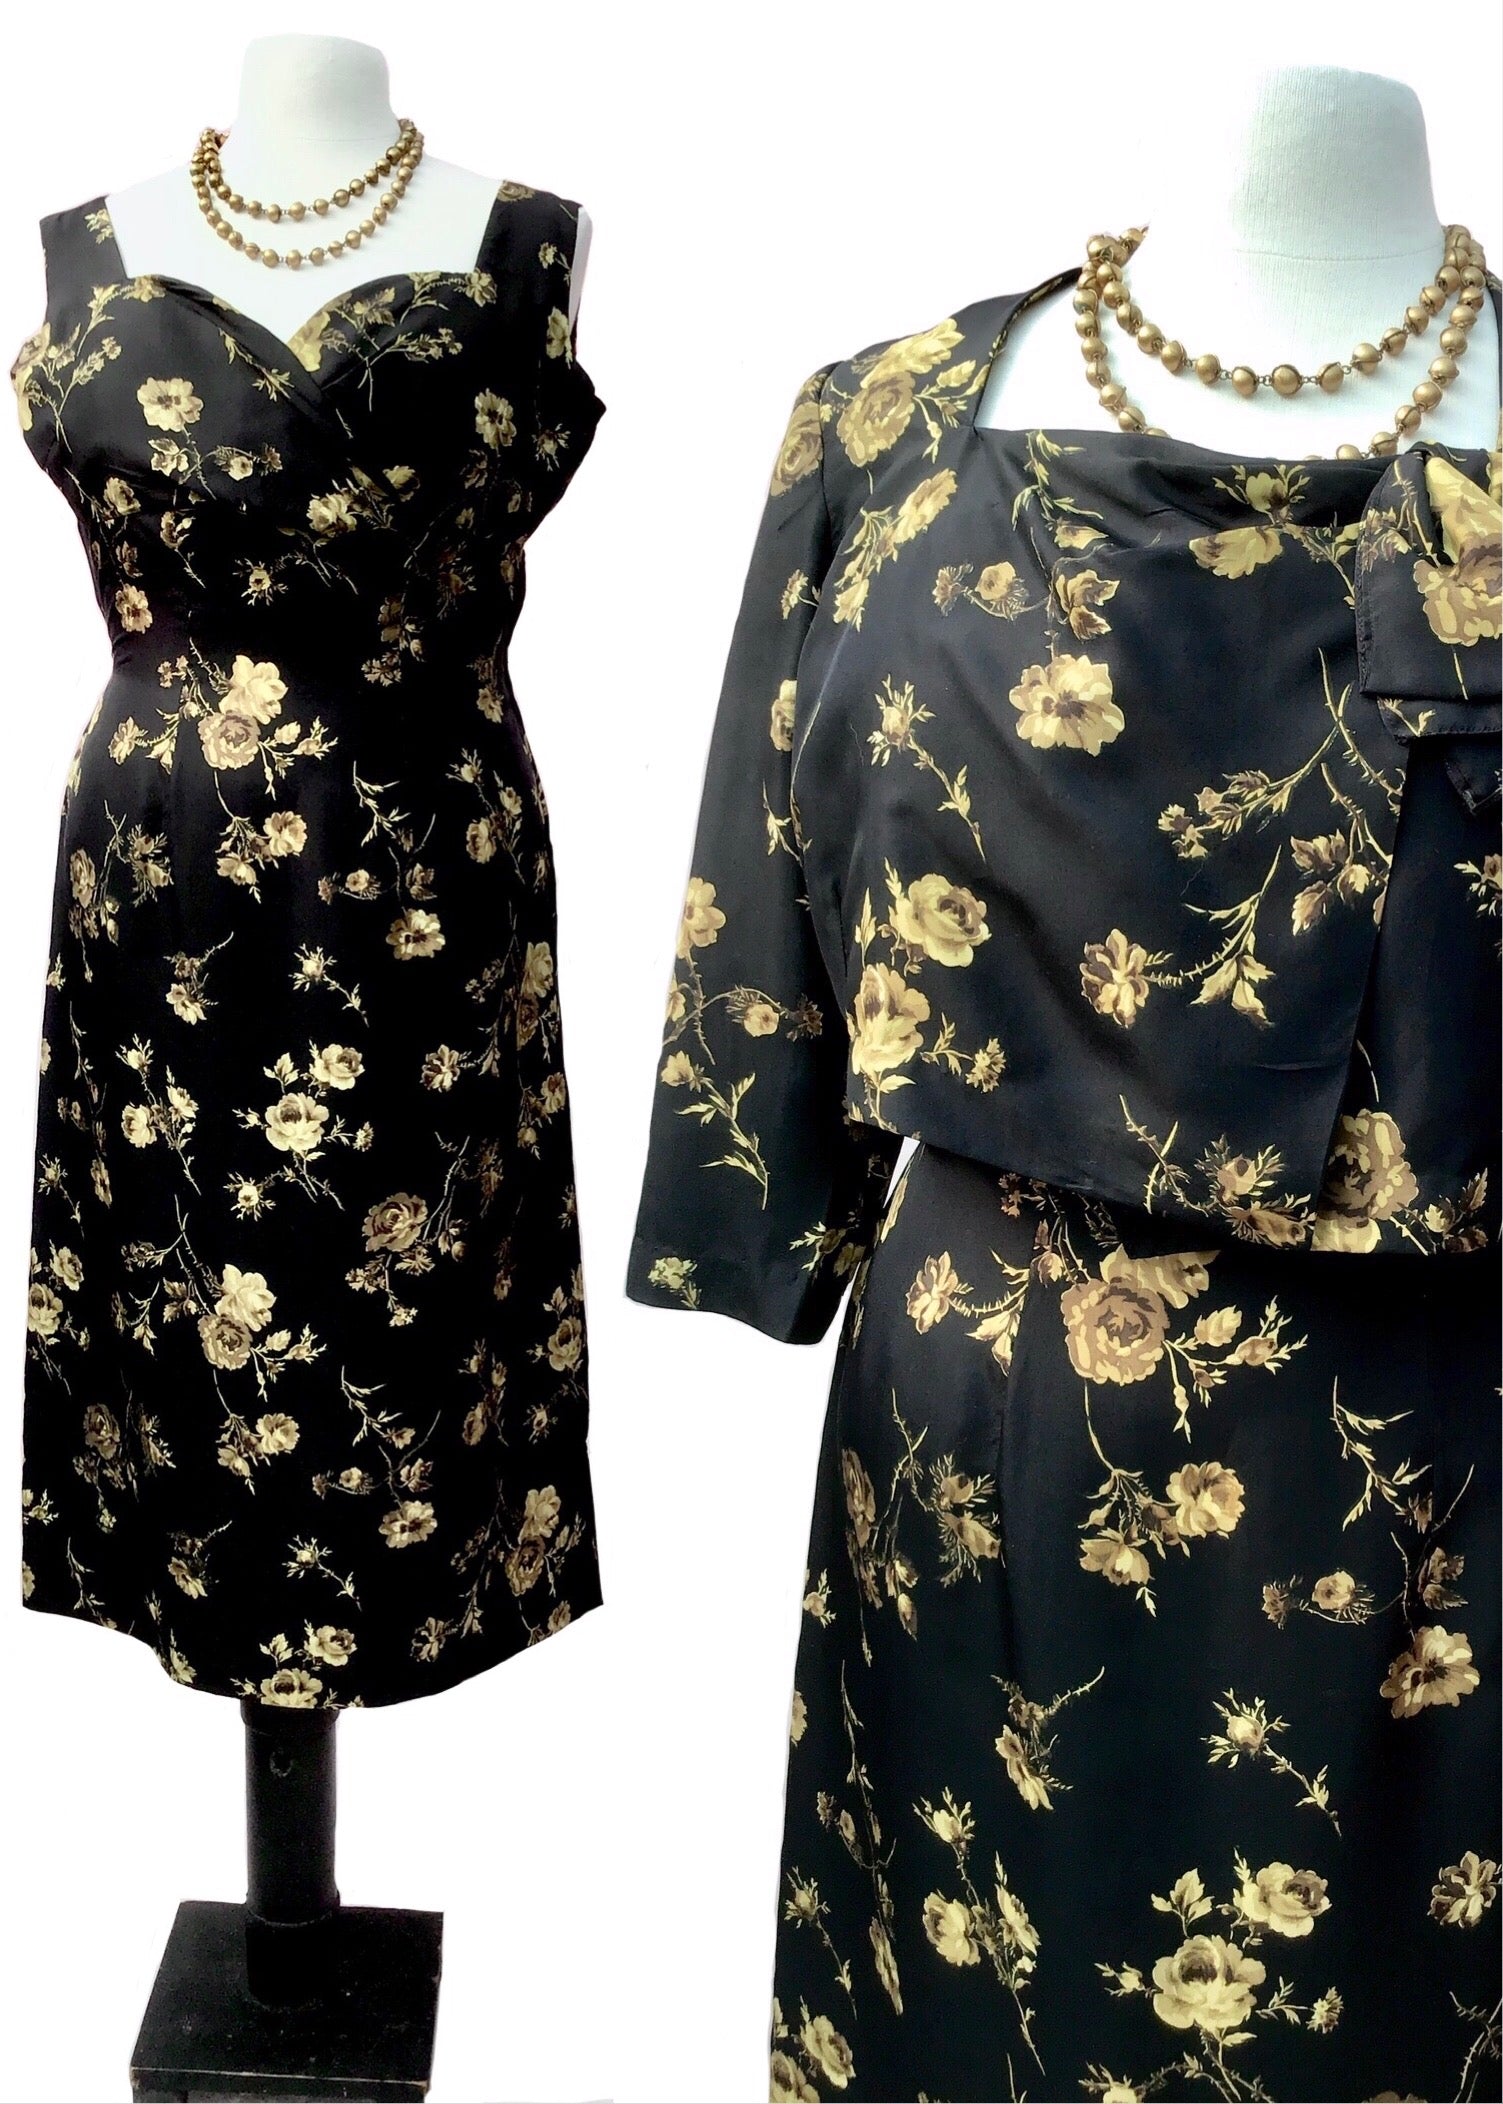 Vintage Frederick starke cocktail dress with matching box jacket in black silk with a muted gold rose print, vintage era 1960s, perfect for a wedding or summer event. To fit 40 inchbust